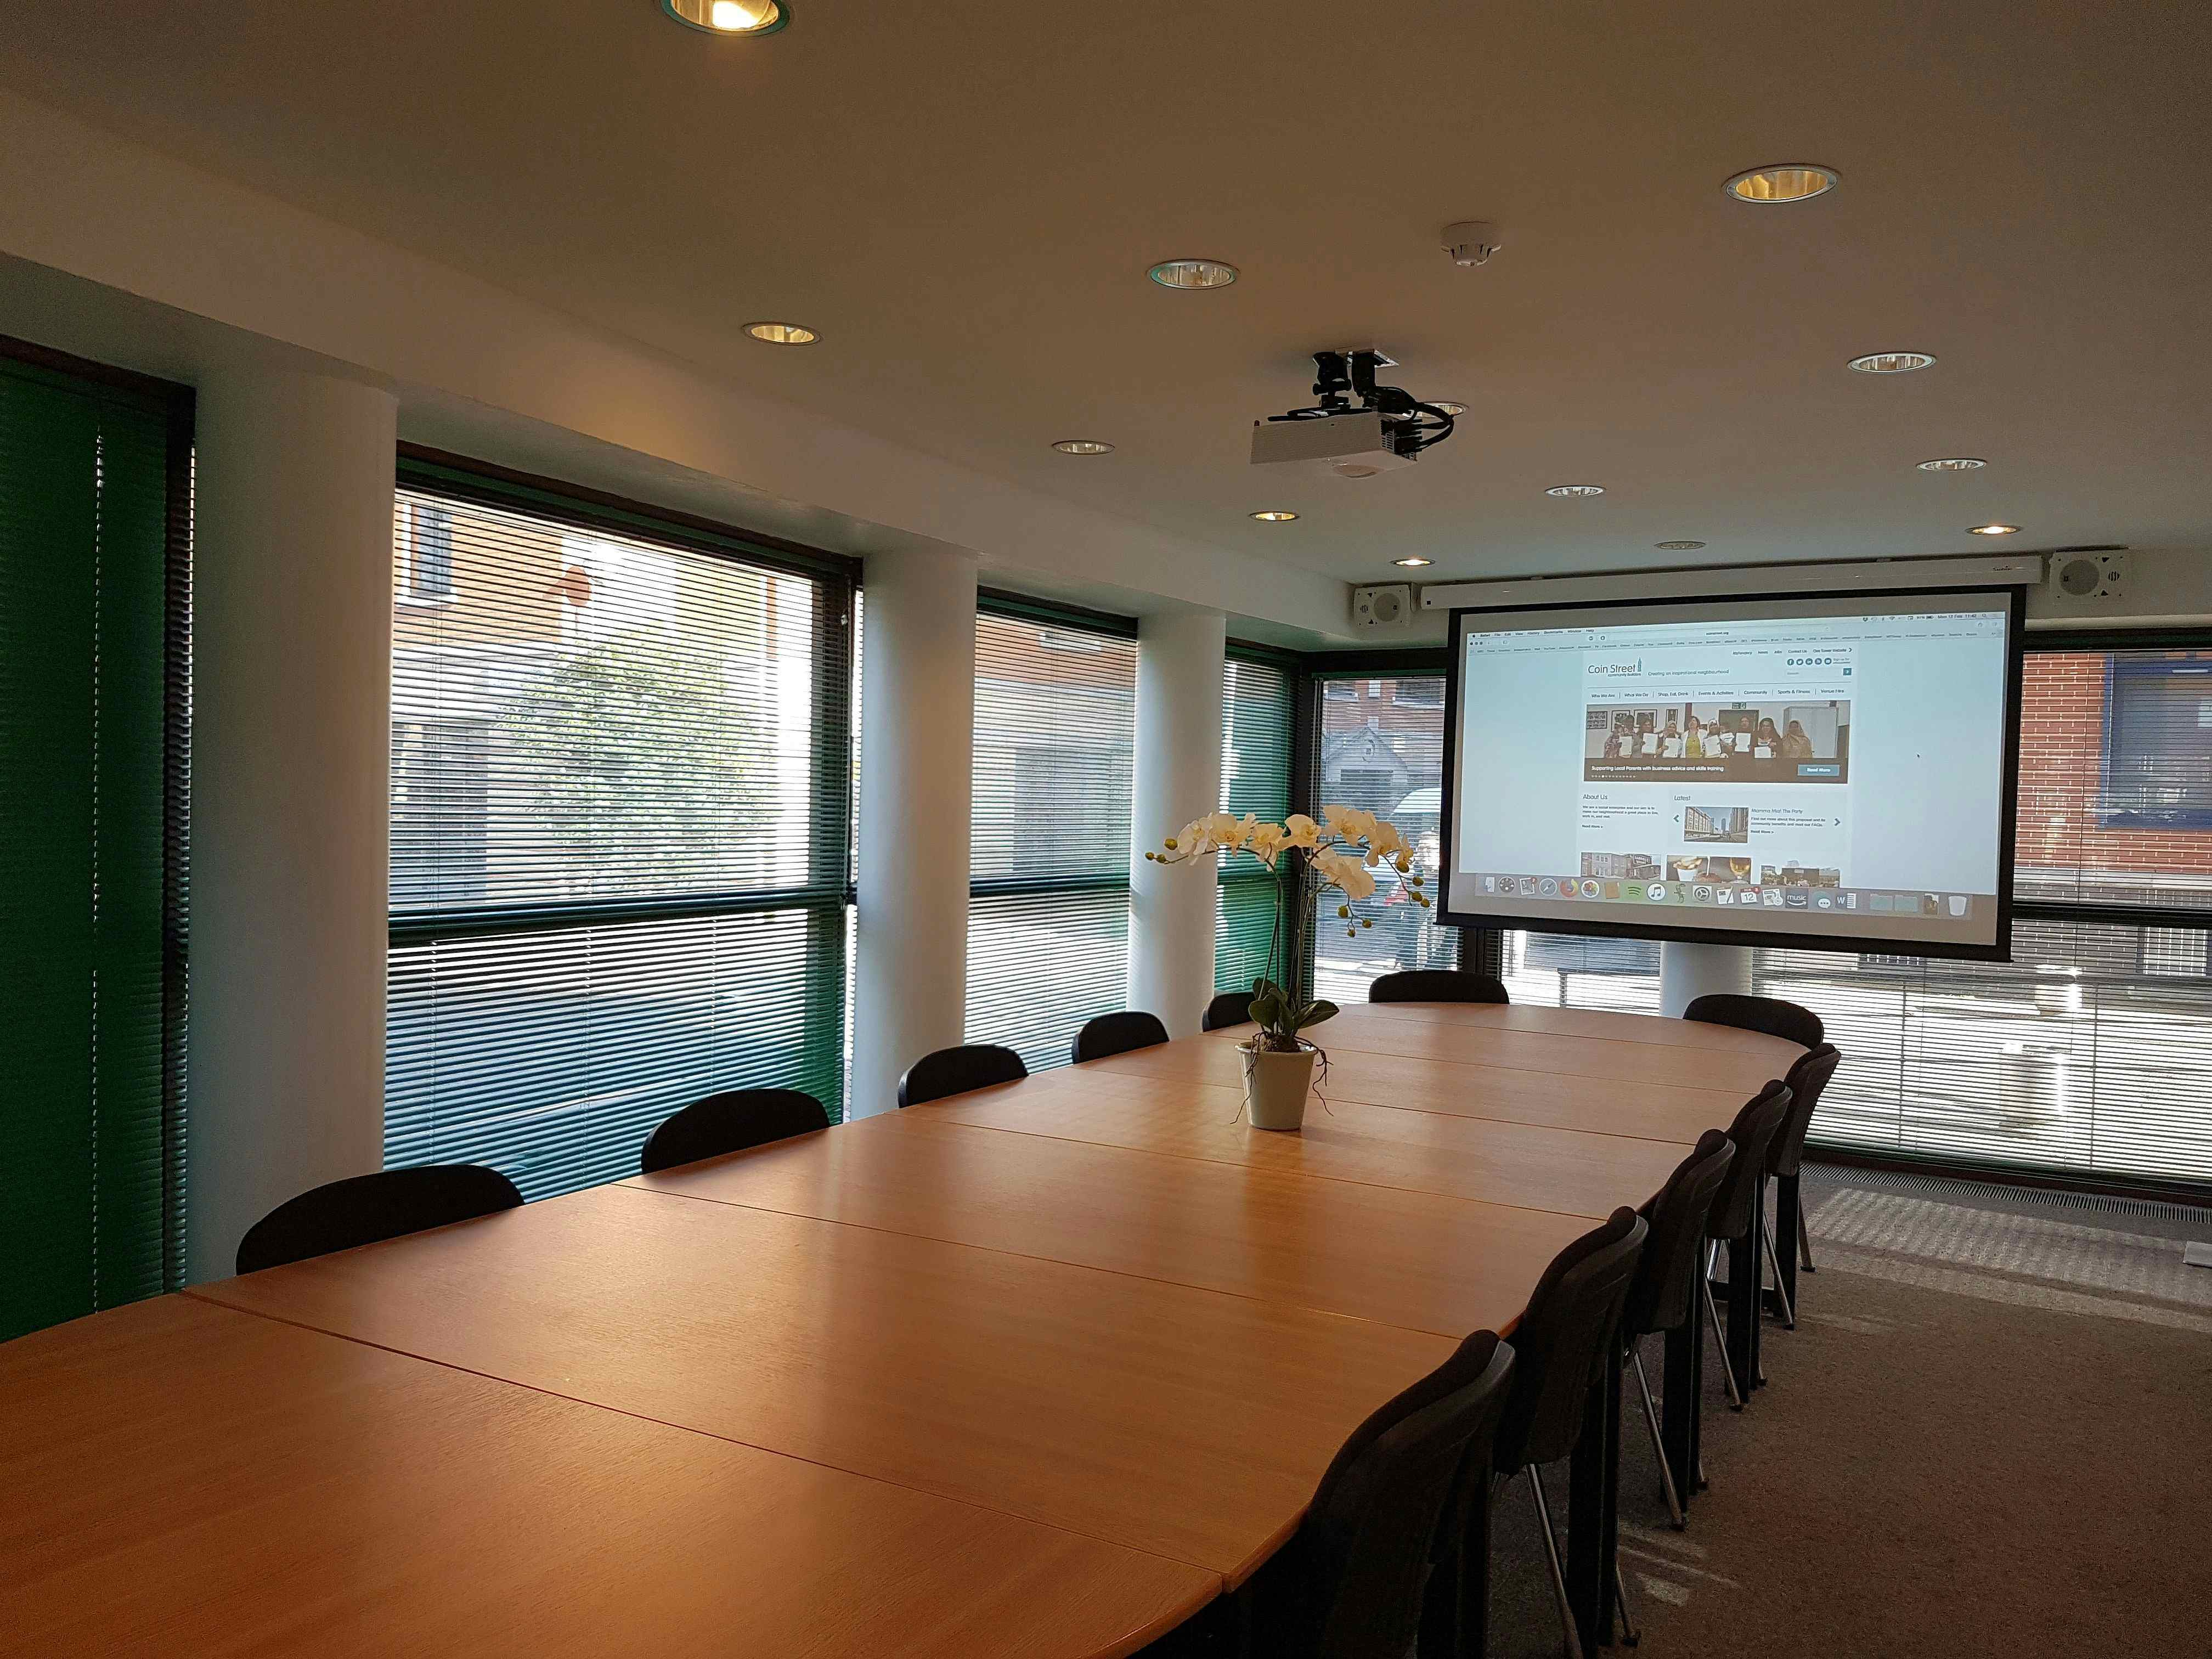 Palm Meeting Room, Coin Street Conference Centre